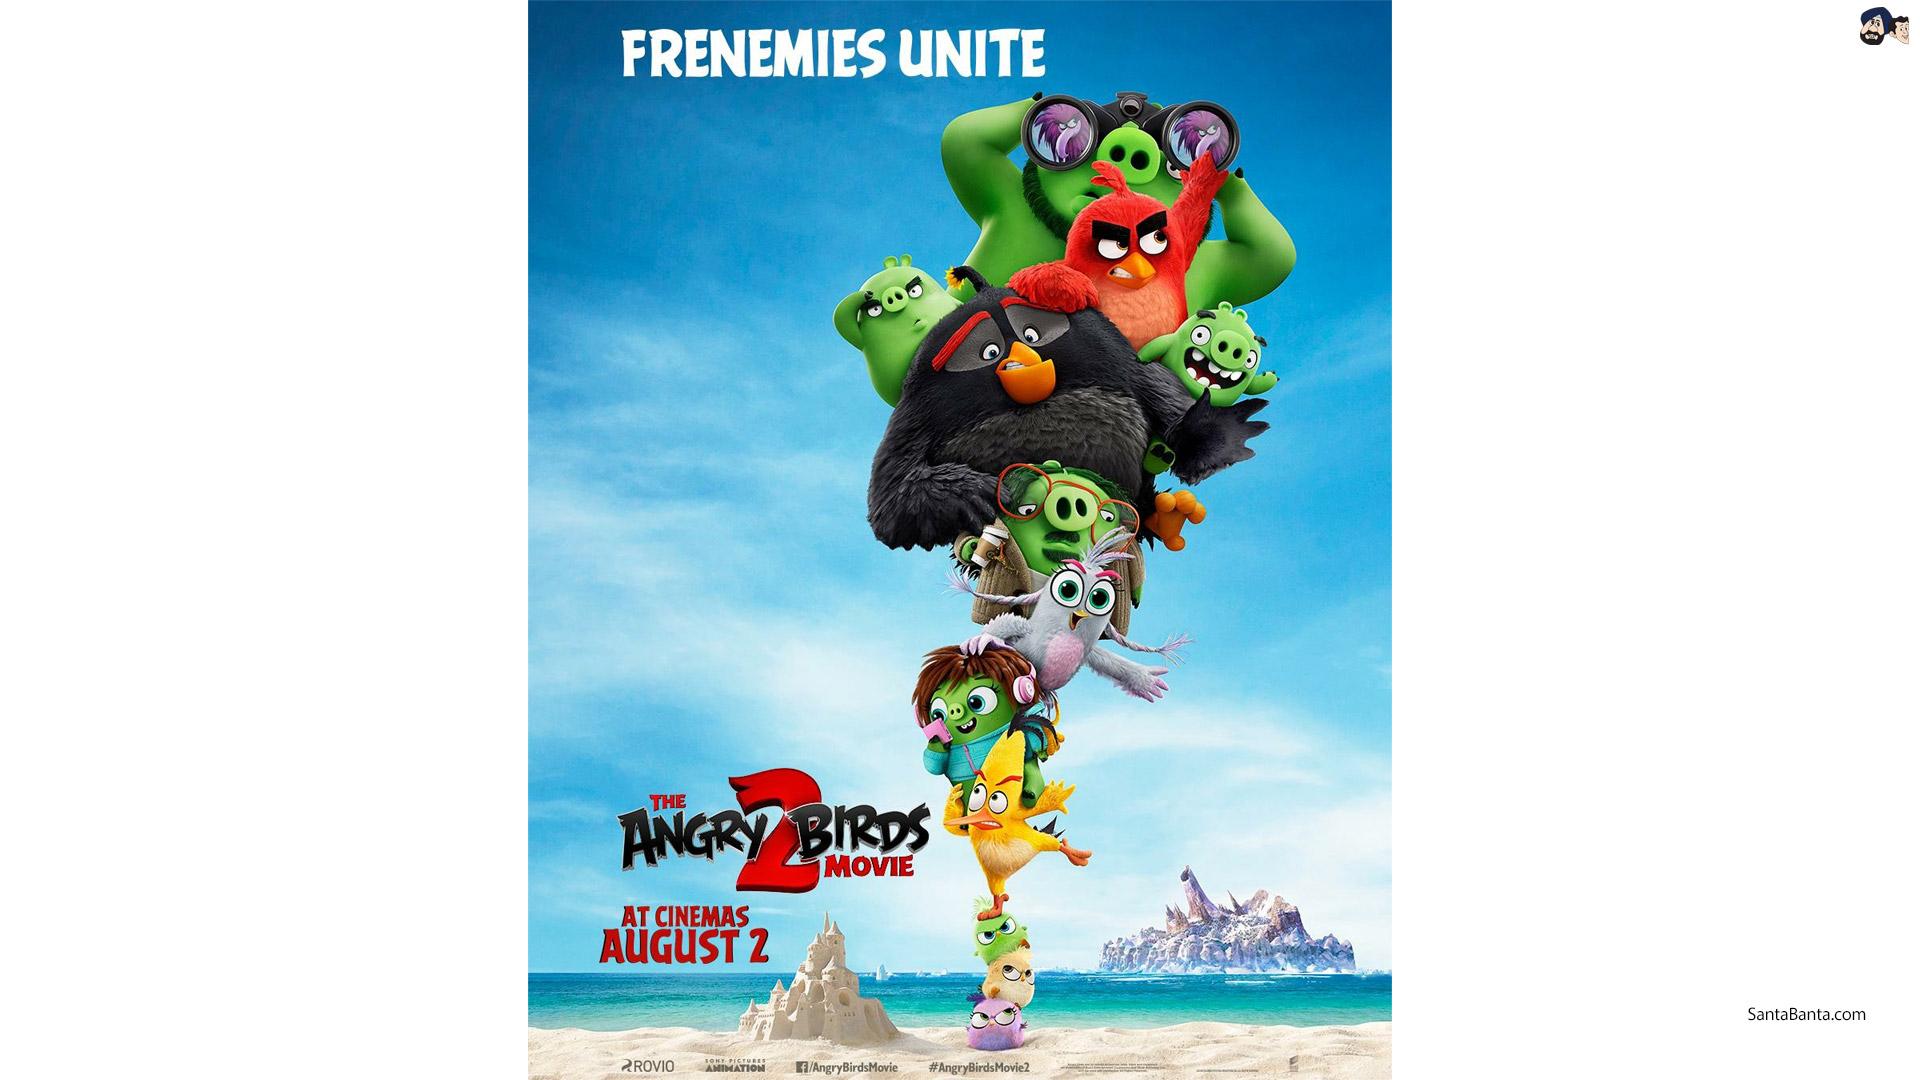 The Angry Birds Movie 2 (August 2019)